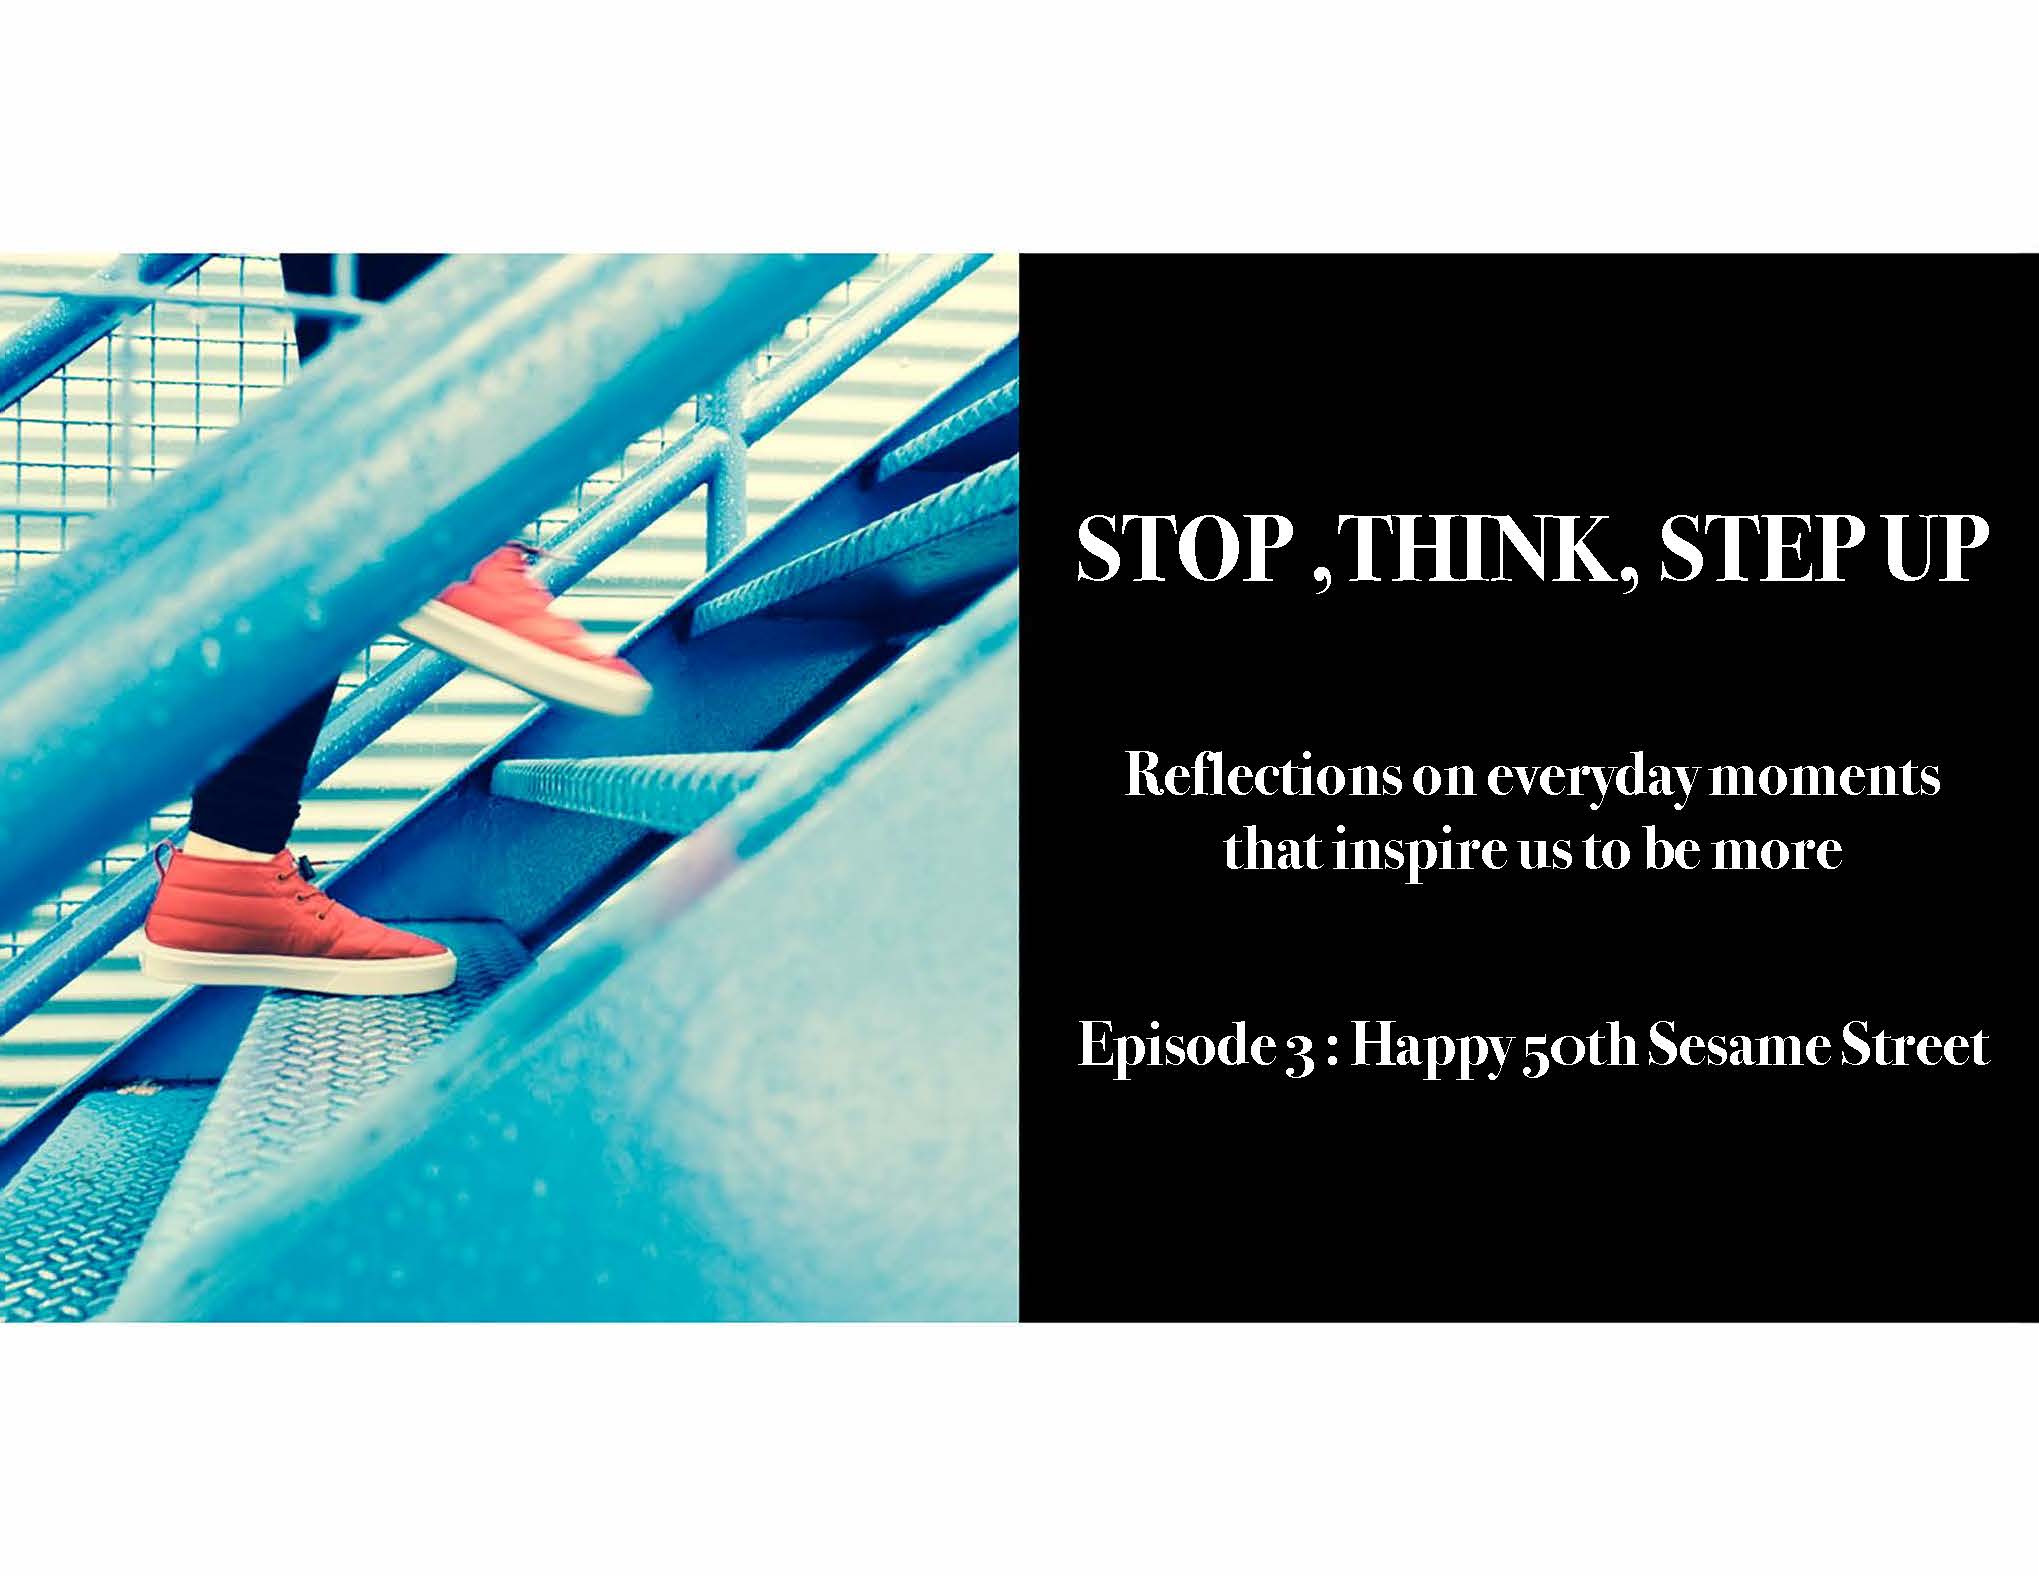 Stop, Think, Step Up, Espisode 3: Happy 50th Sesame Street